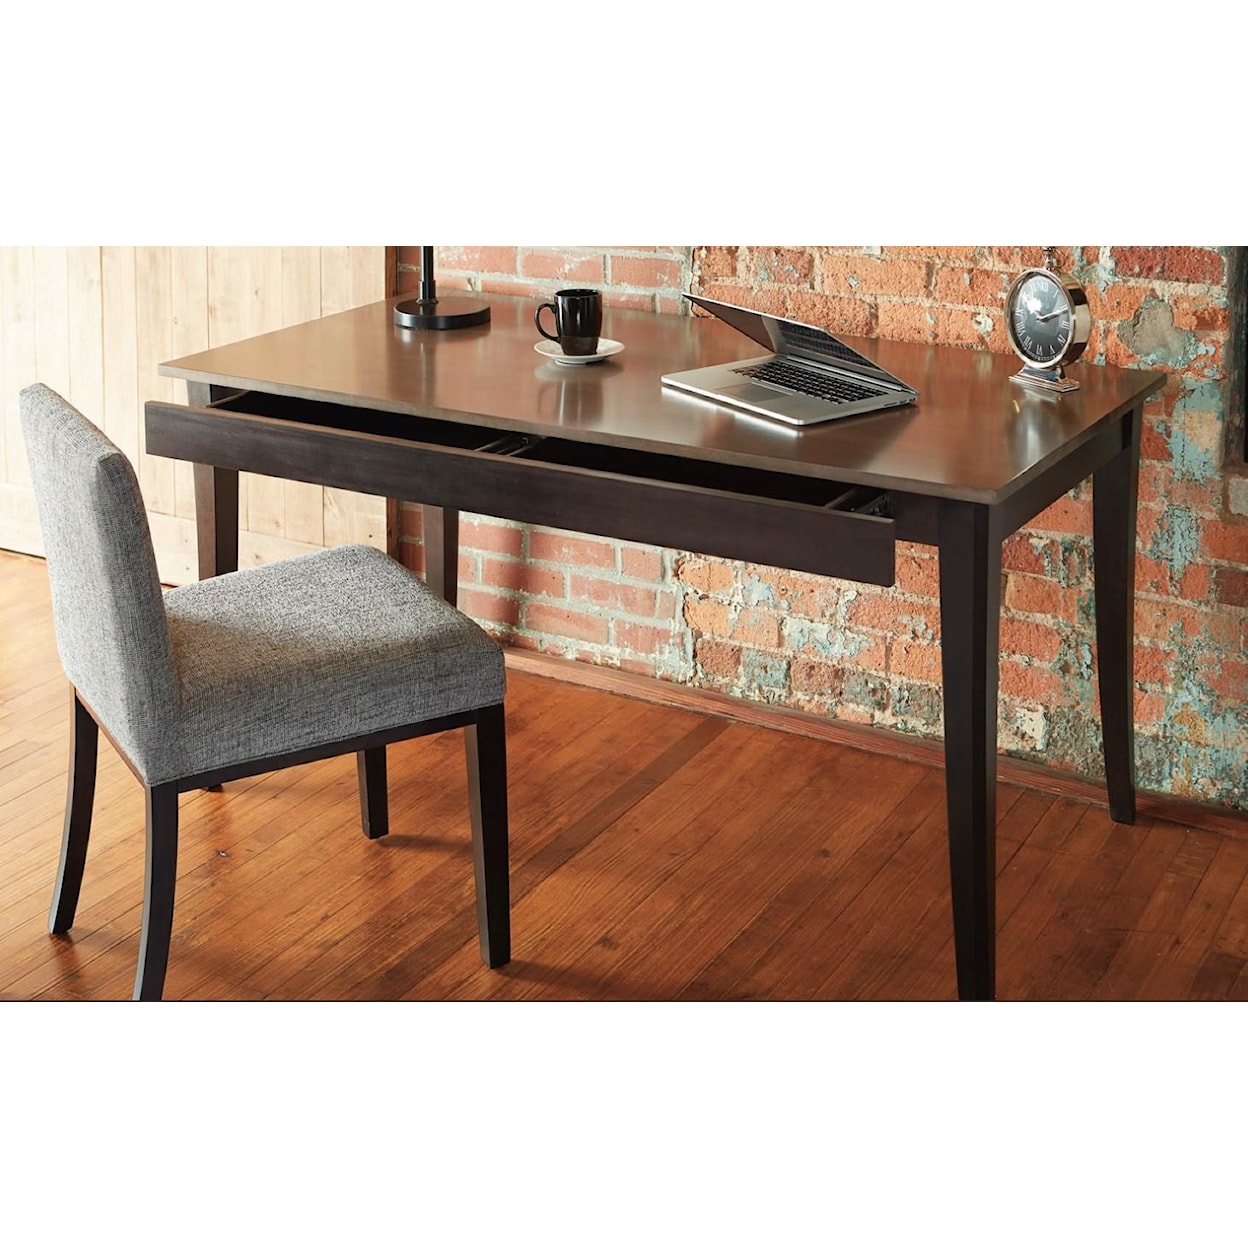 Bermex Daley Daley Desk and Chair